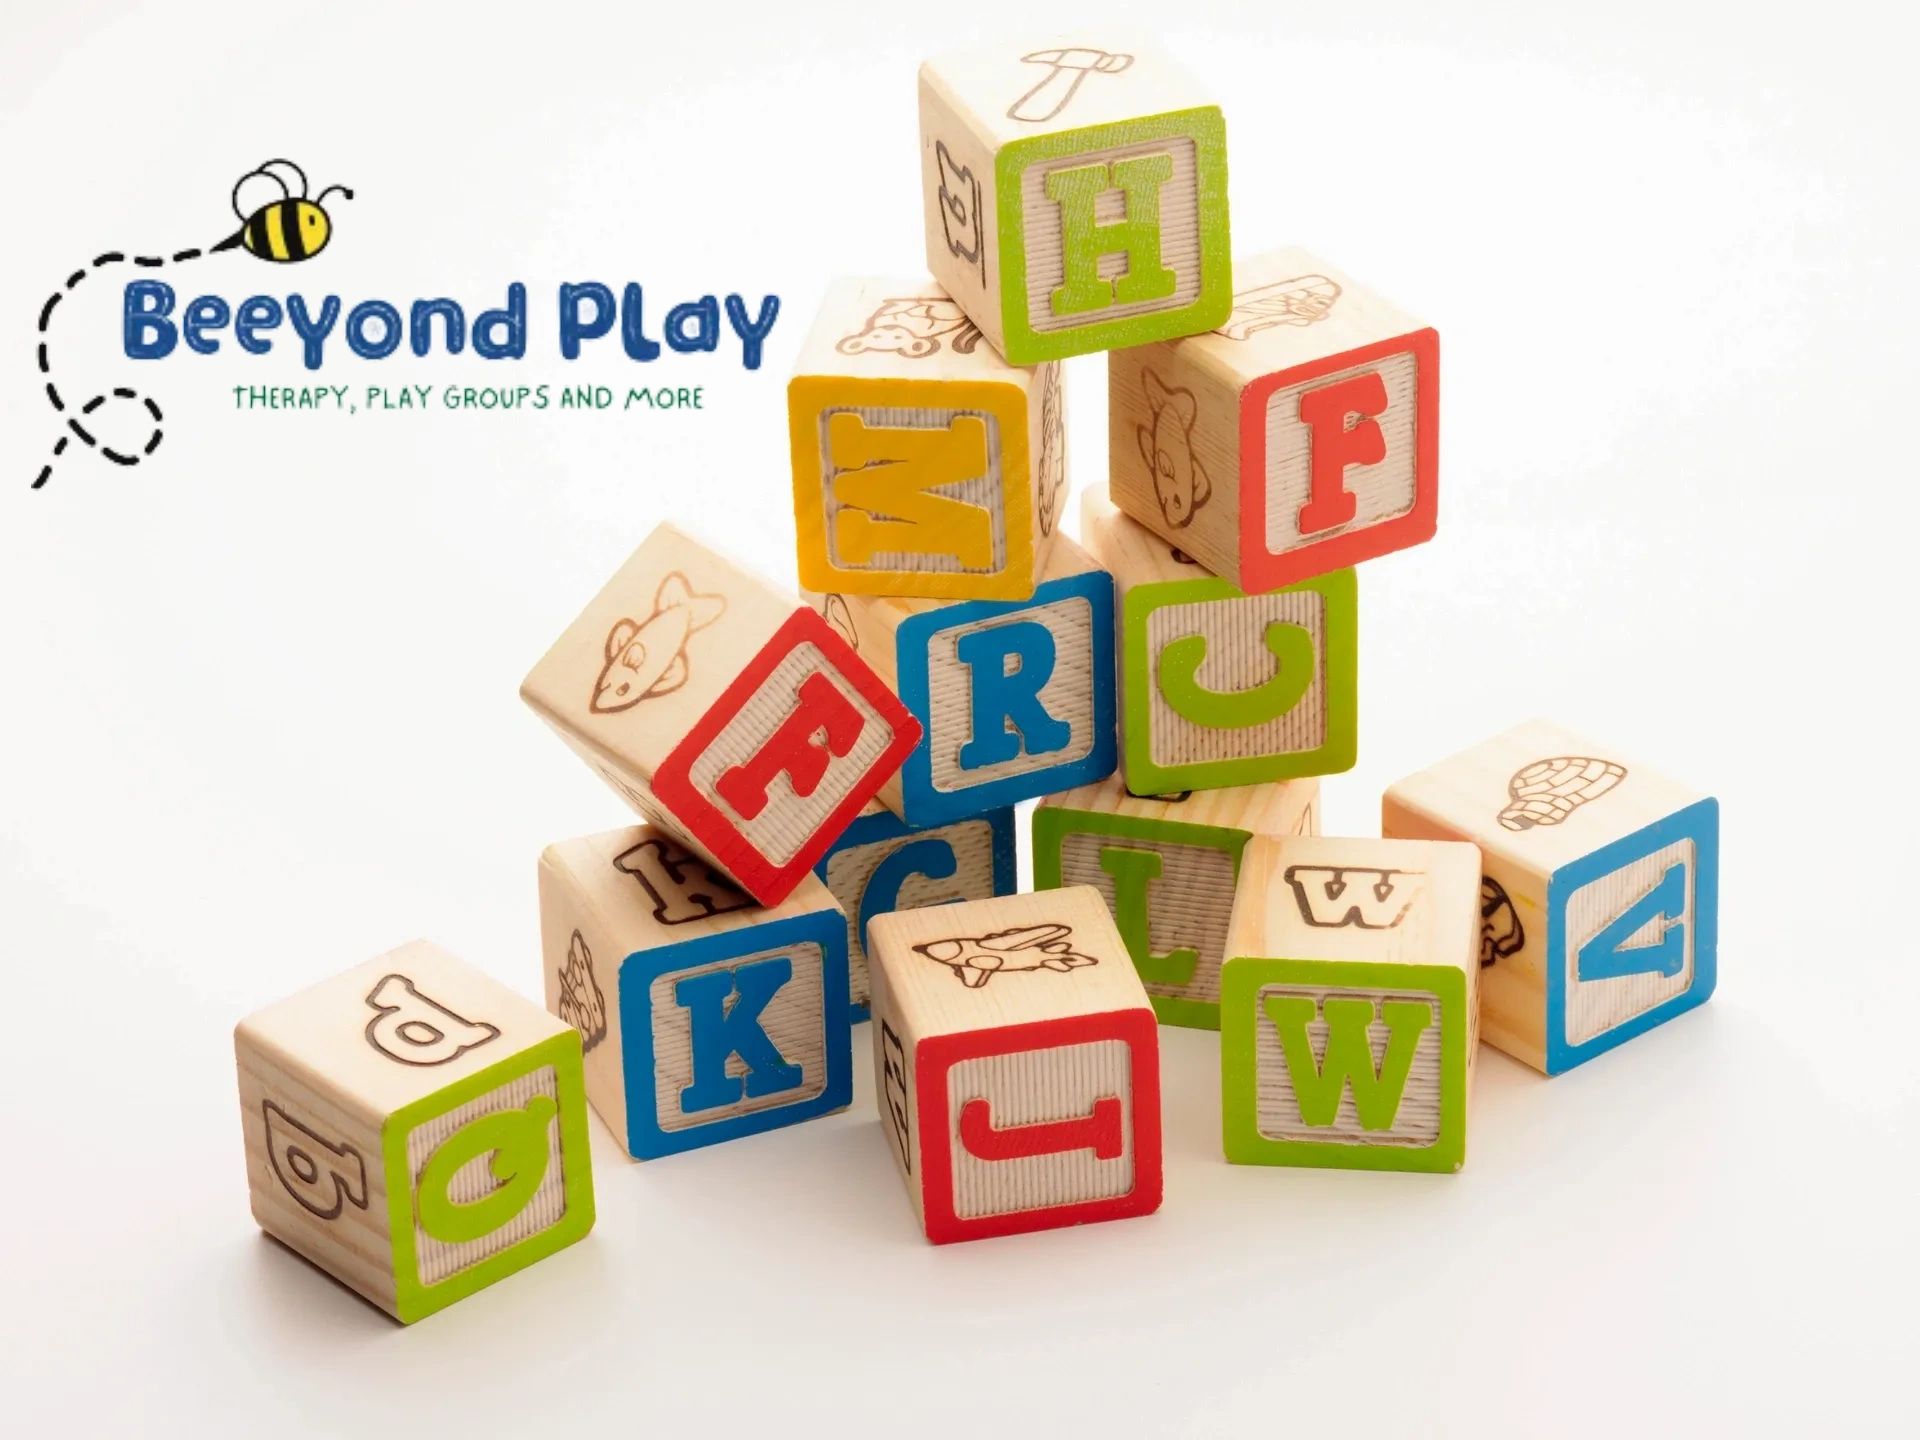 Occupational therapy. Fine motor skills. Developmental delay. Play group. Gross motor delay